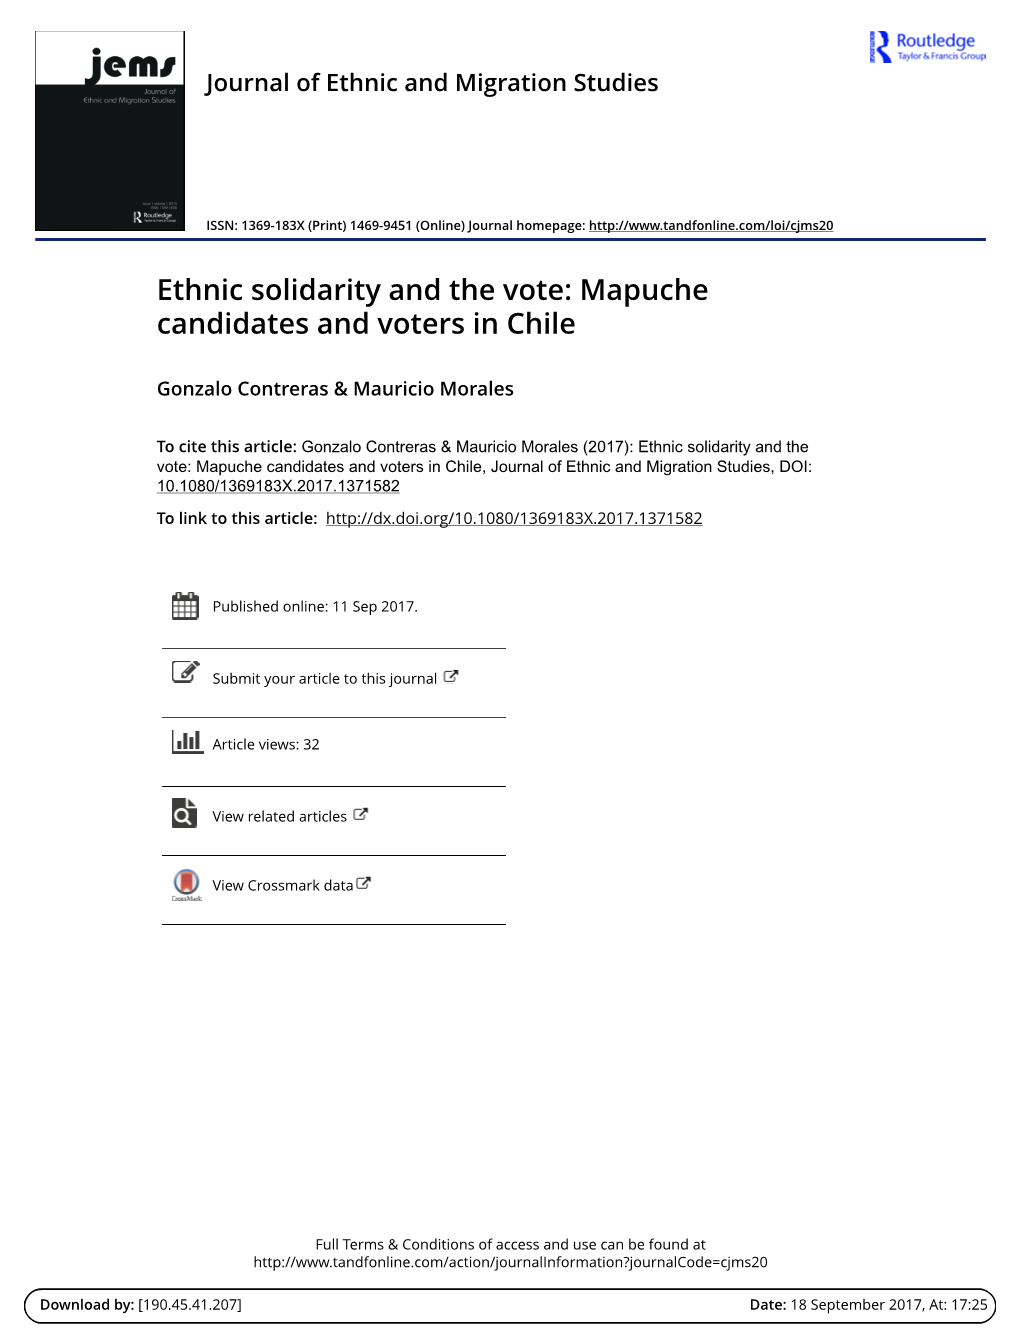 Ethnic Solidarity and the Vote: Mapuche Candidates and Voters in Chile